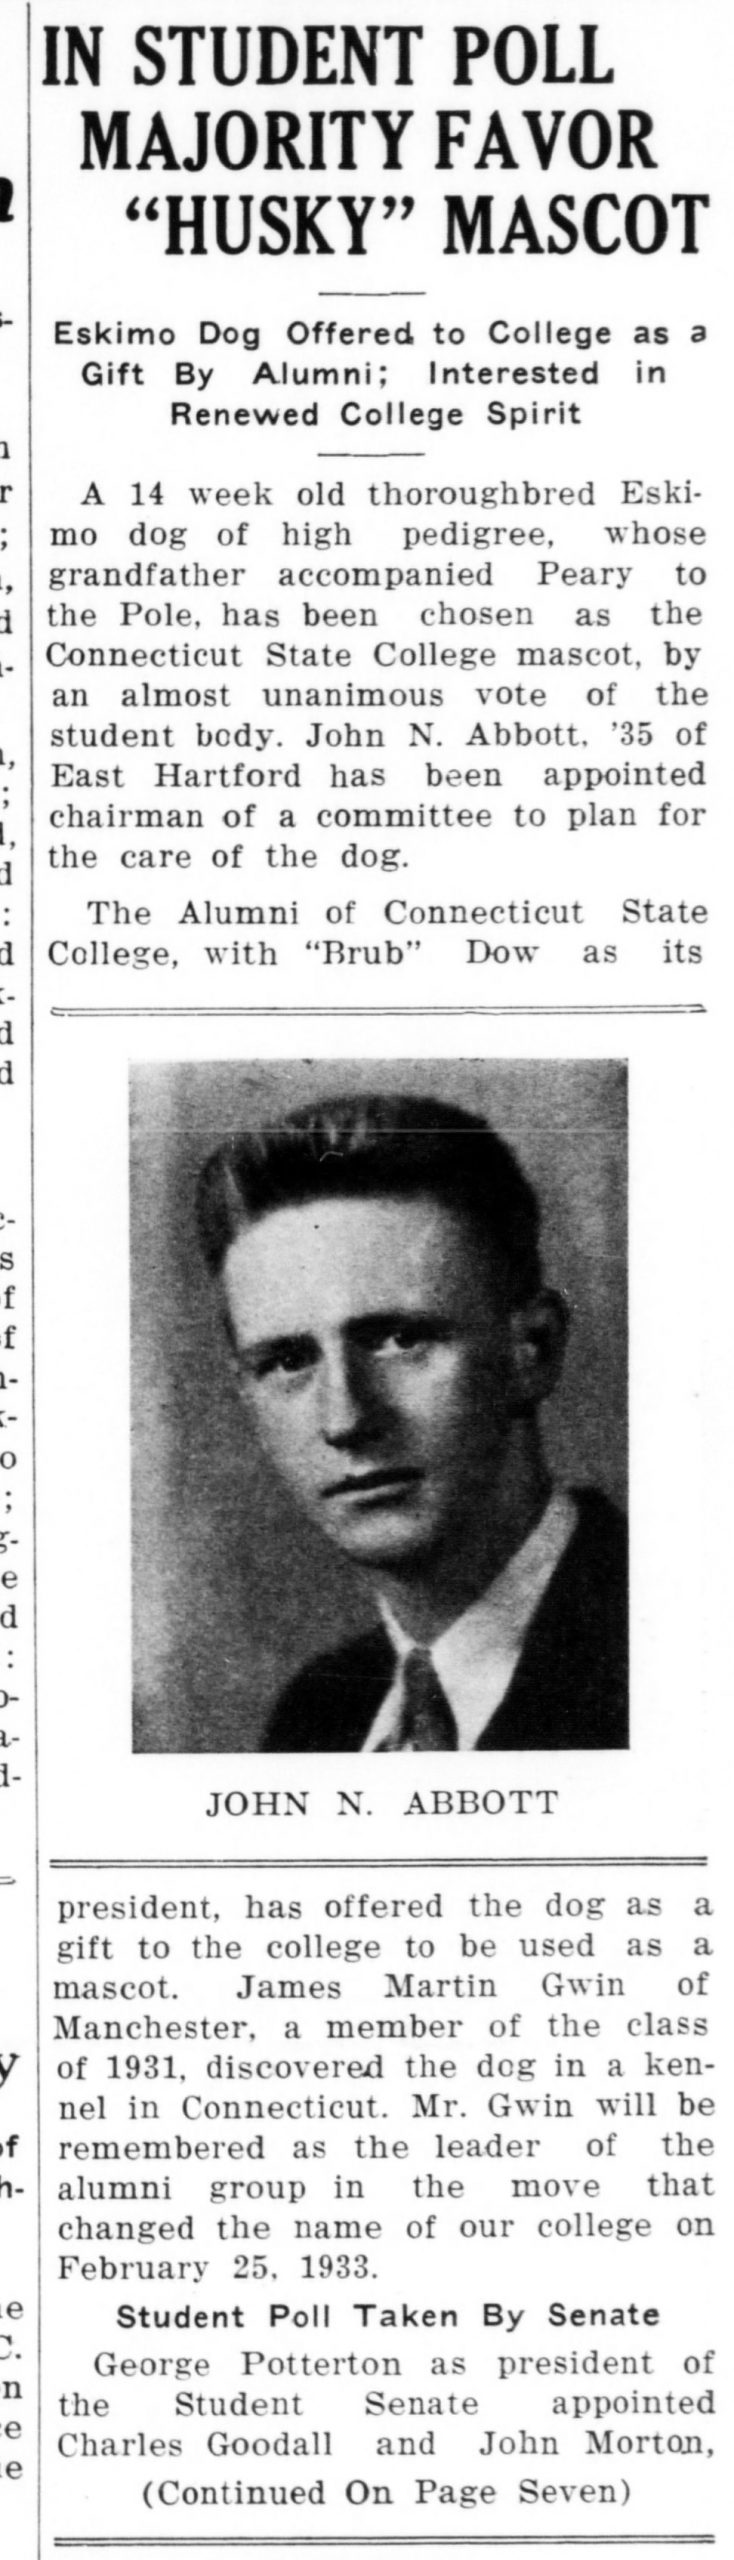 Article in the November 27, 1934, Connecticut Campus about the choice of a Husky dog as the Connecticut State College Mascot